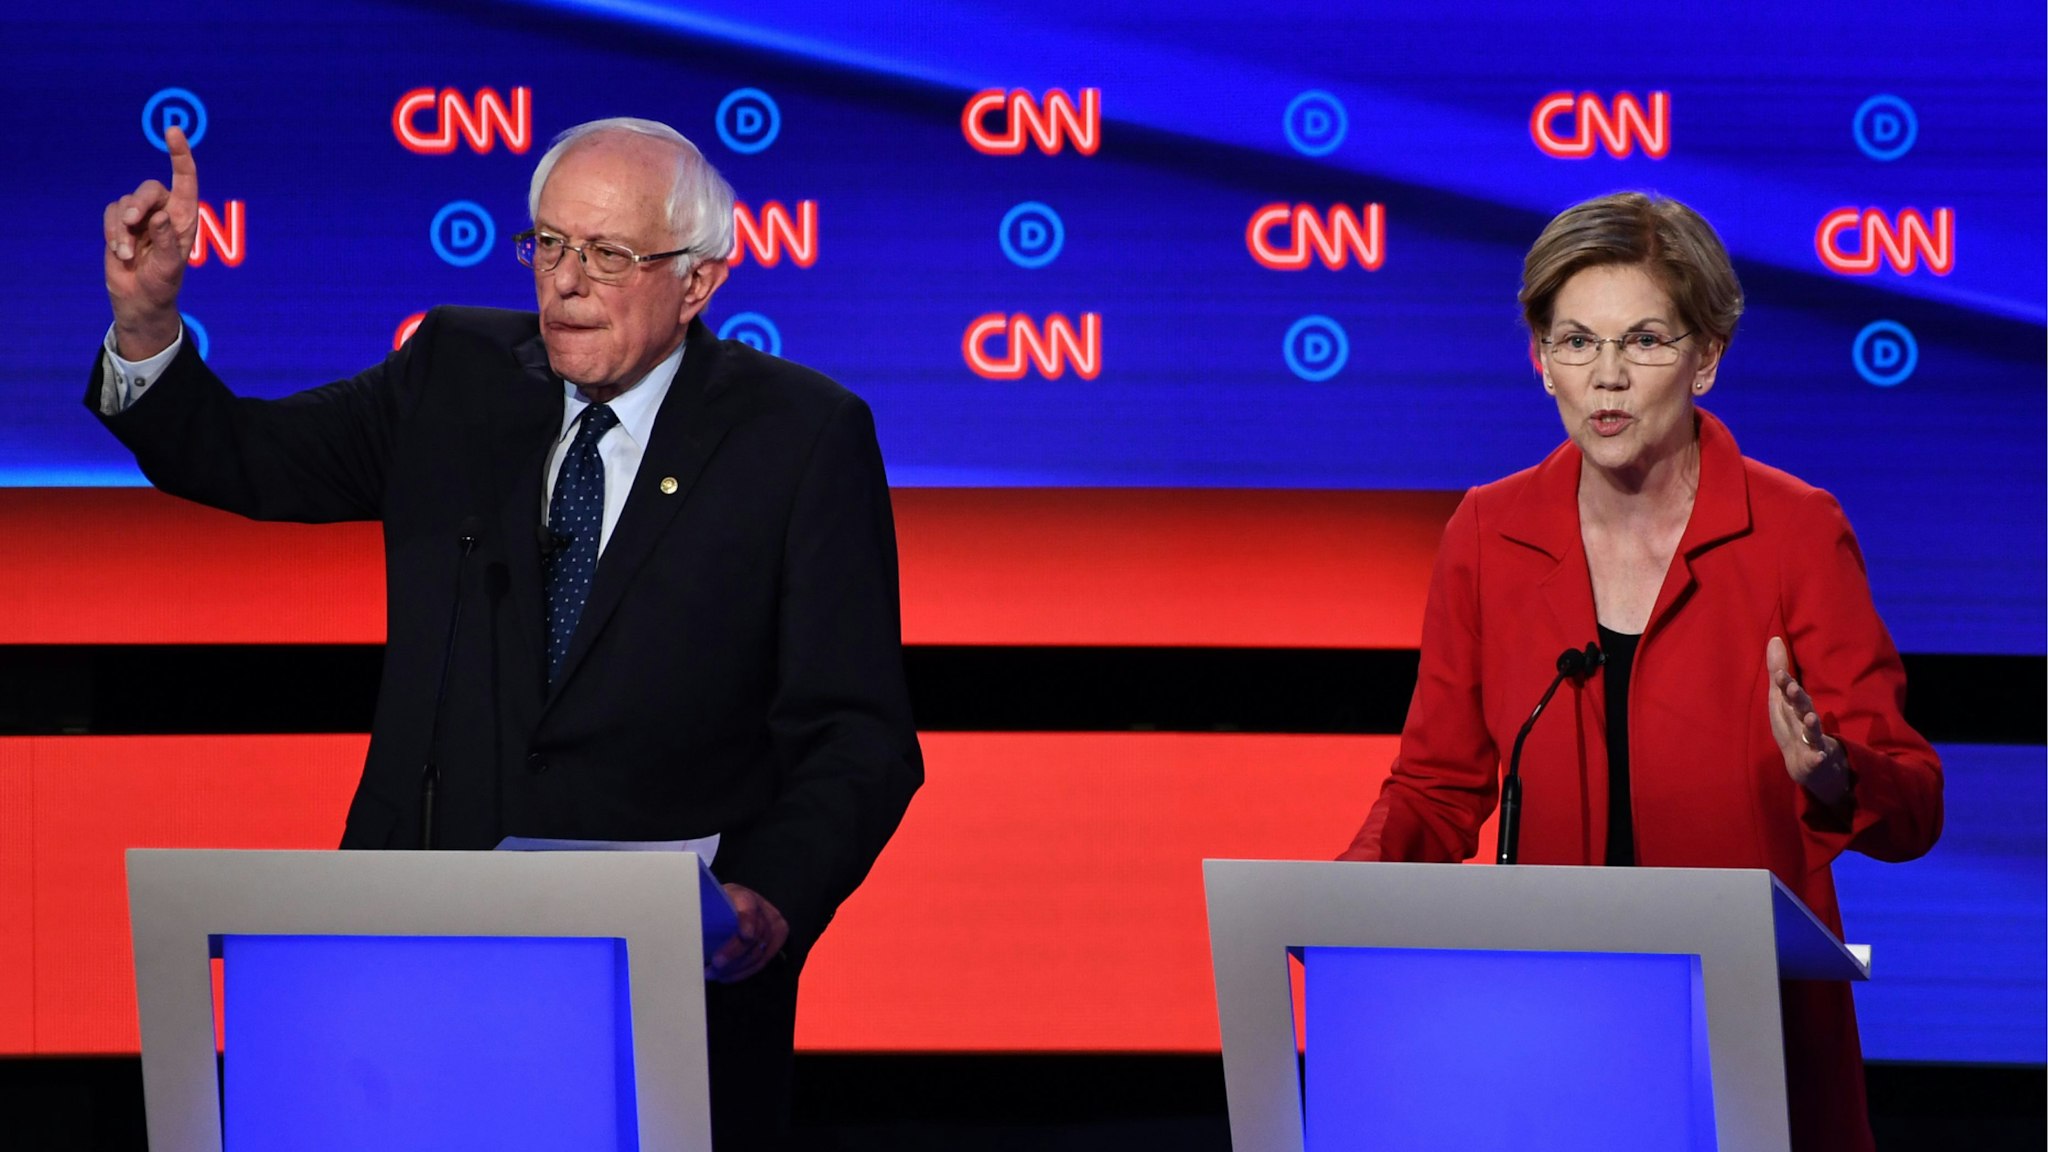 Democratic presidential hopeful US Senator from Massachusetts Elizabeth Warren (R) speaks next to US senator from Vermont Bernie Sanders during the first round of the second Democratic primary debate of the 2020 presidential campaign season hosted by CNN at the Fox Theatre in Detroit, Michigan on July 30, 2019.